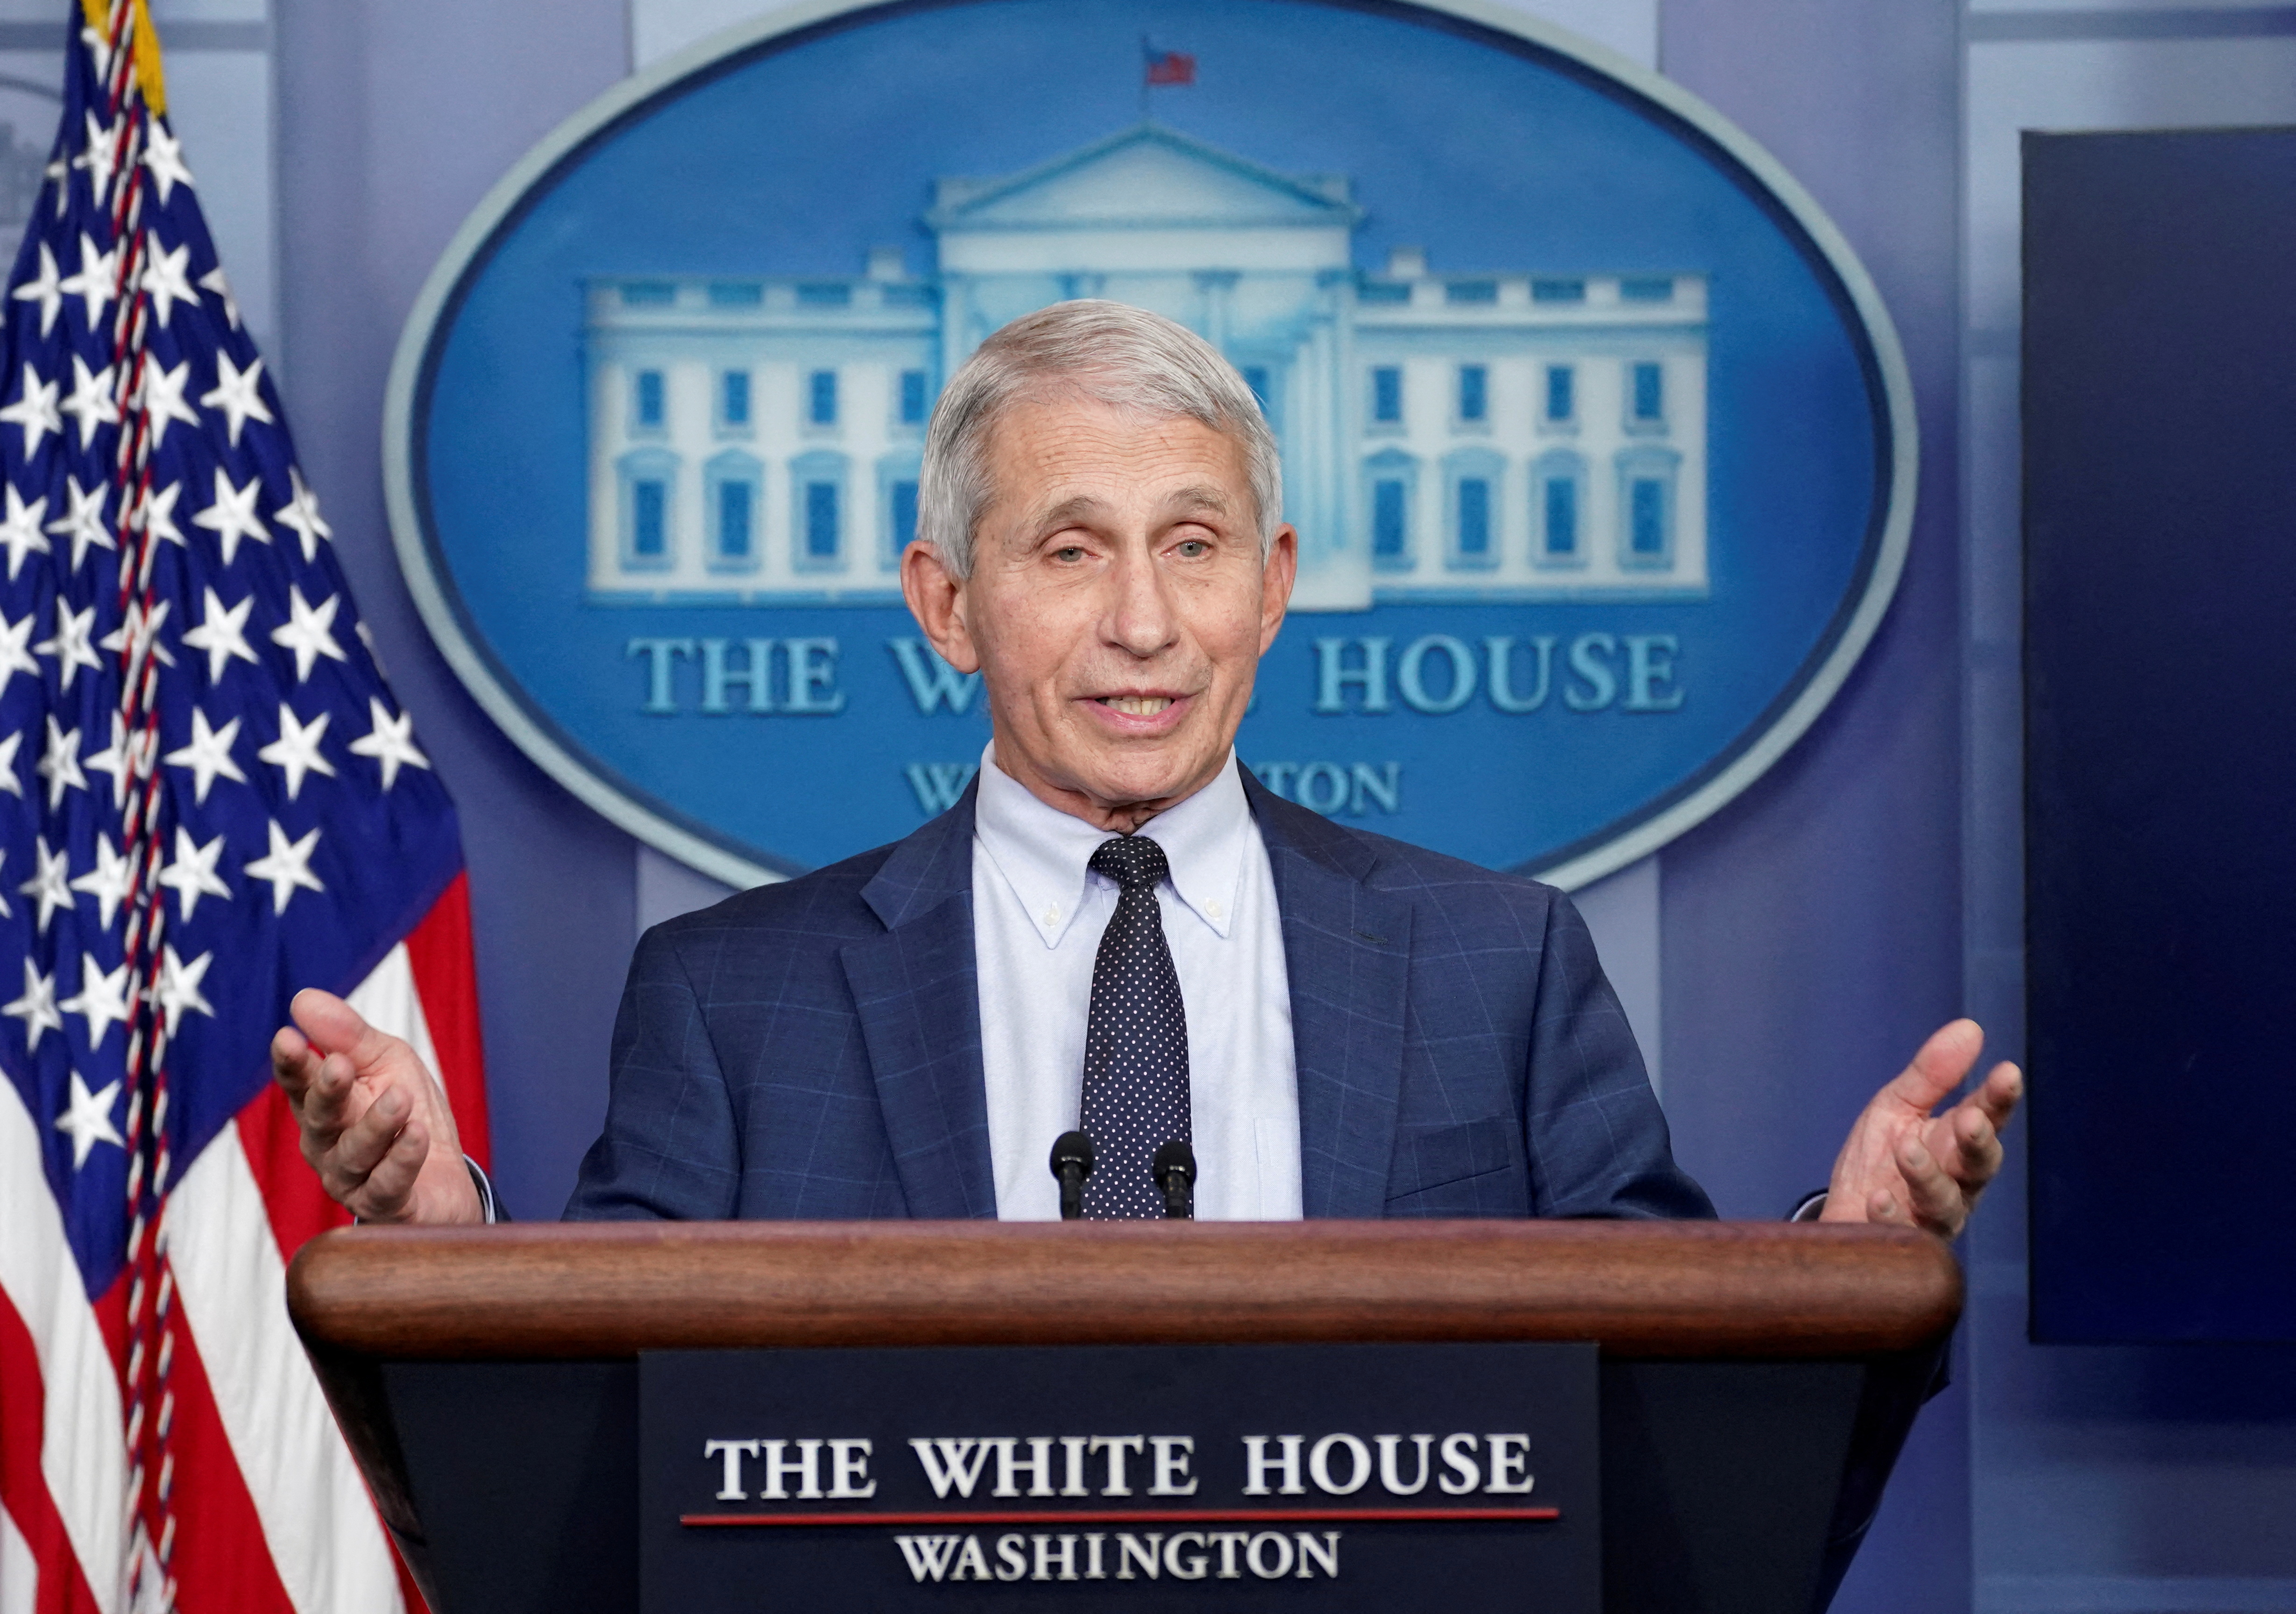 Dr. Anthony Fauci speaks about the Omicron coronavirus variant during a press briefing at the White House in Washington, U.S., December 1, 2021. REUTERS/Kevin Lamarque/File Photo